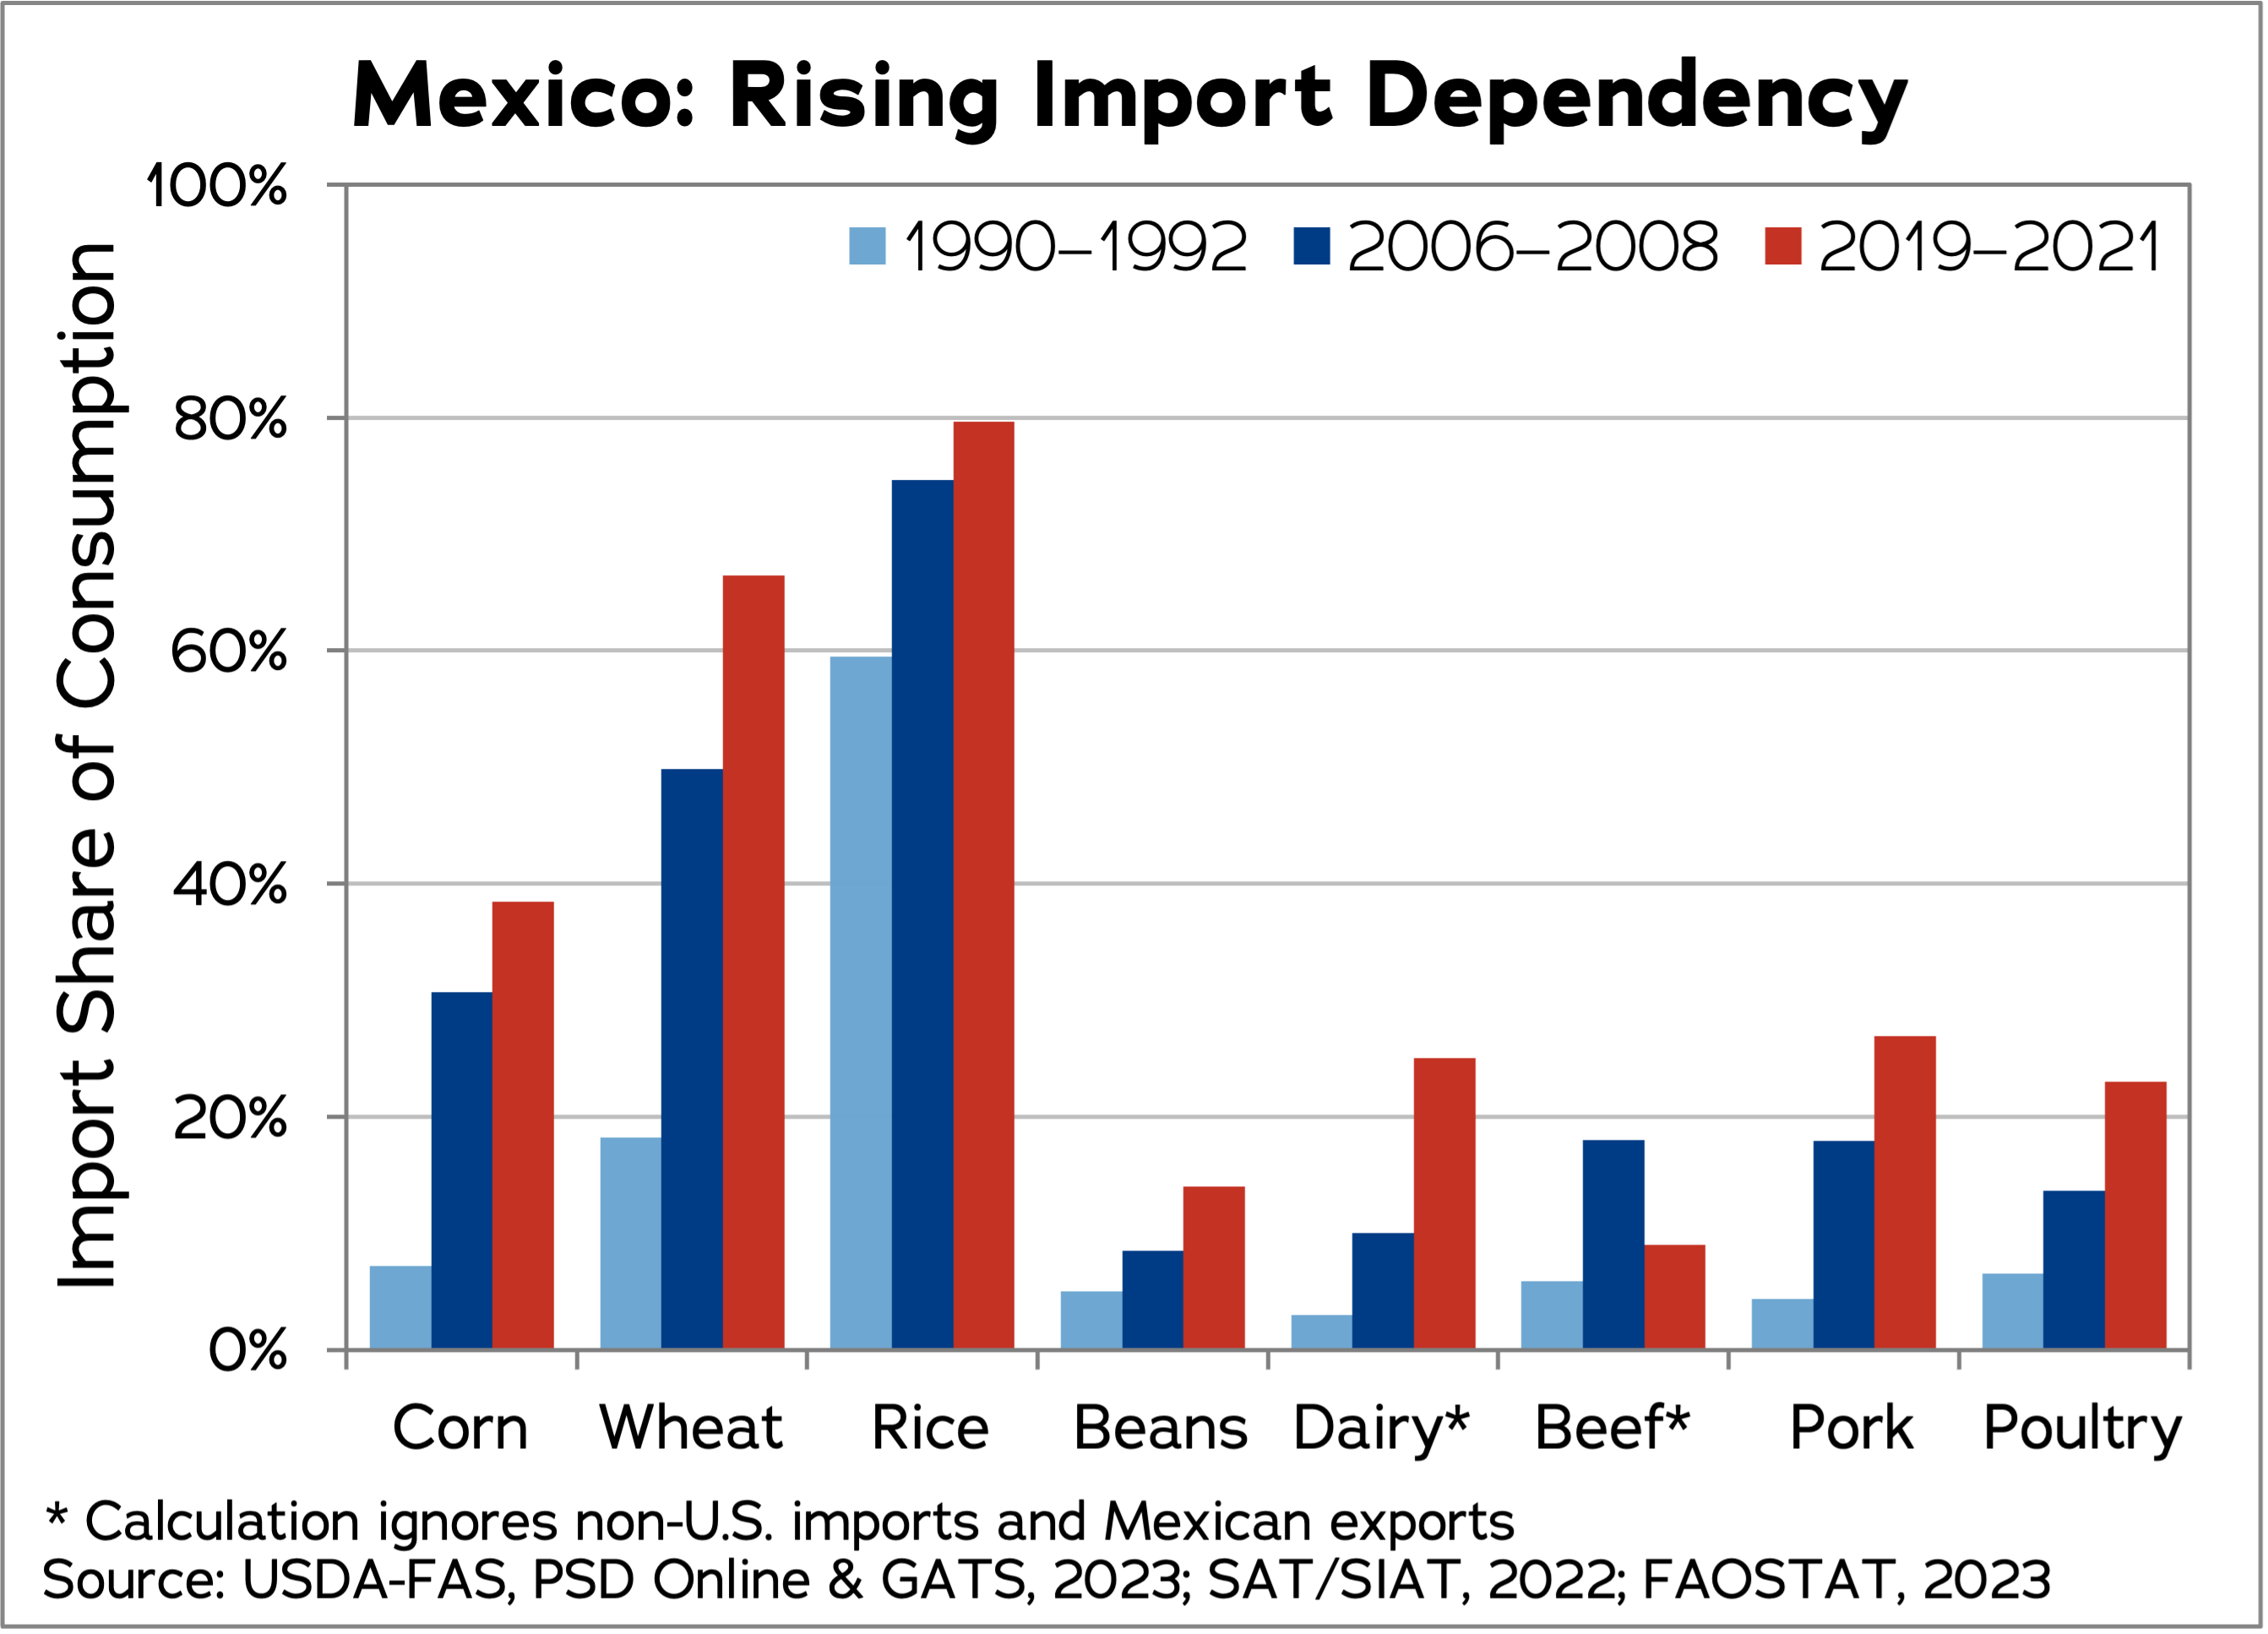 Mexico's rising import dependency